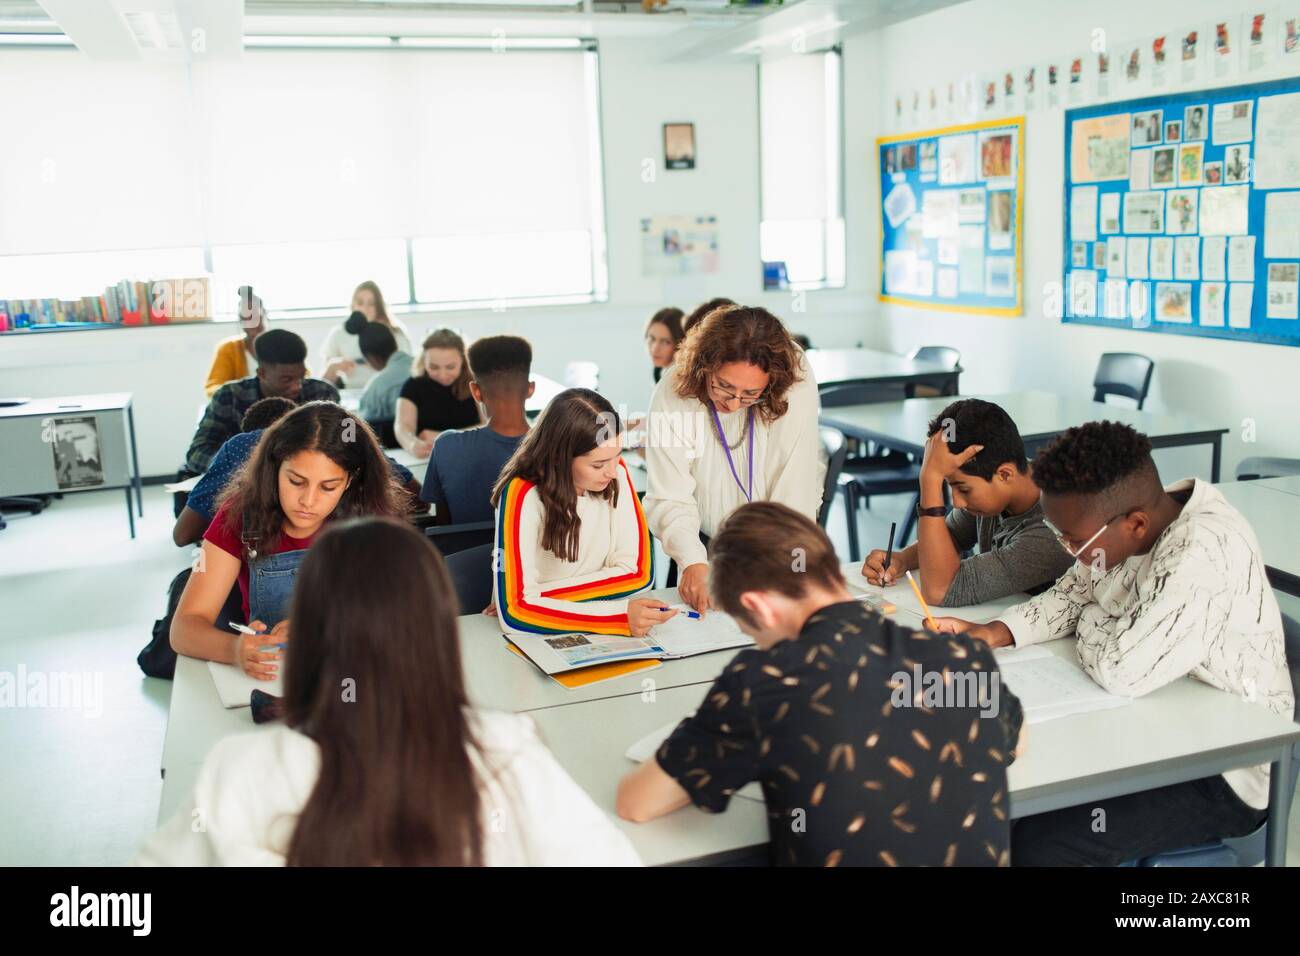 High school teacher helping students studying in classroom Stock Photo